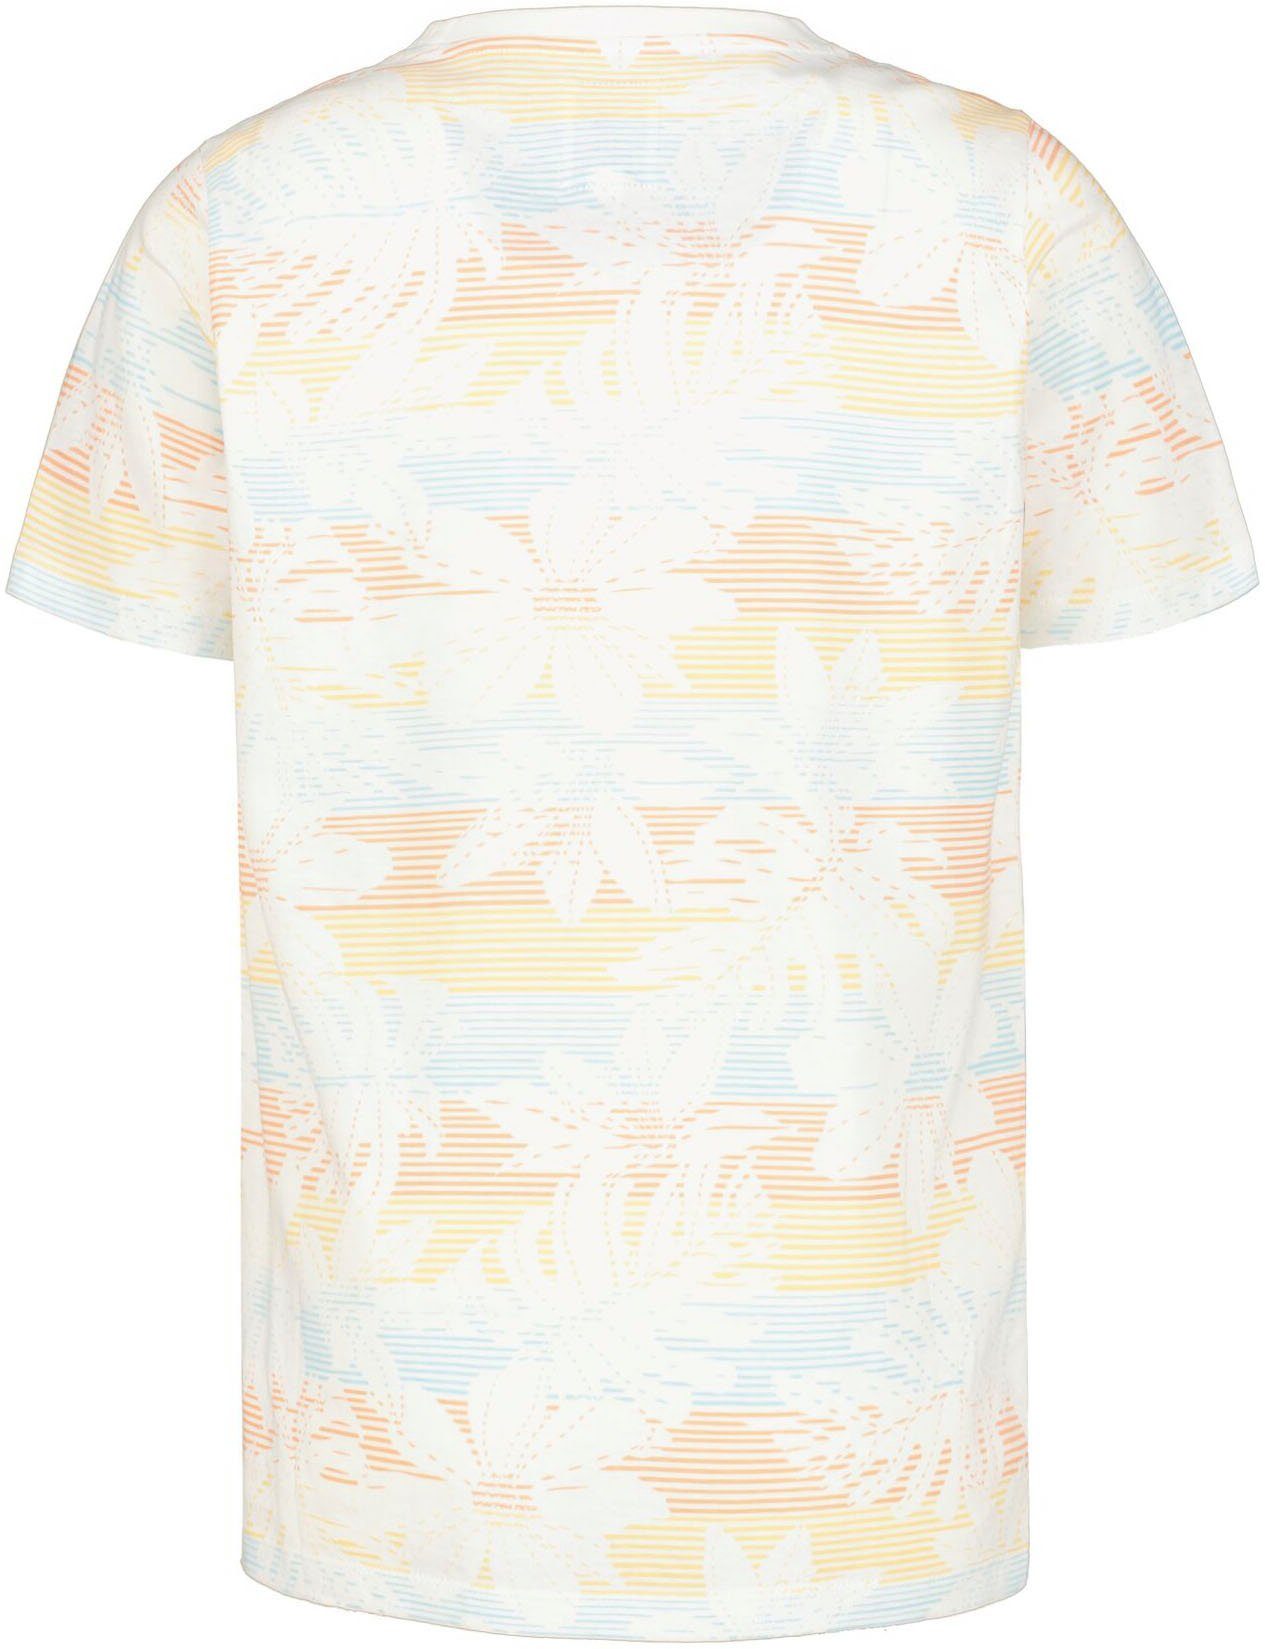 Garcia T-Shirt floralem mit BOYS Allovermuster, for offwhite